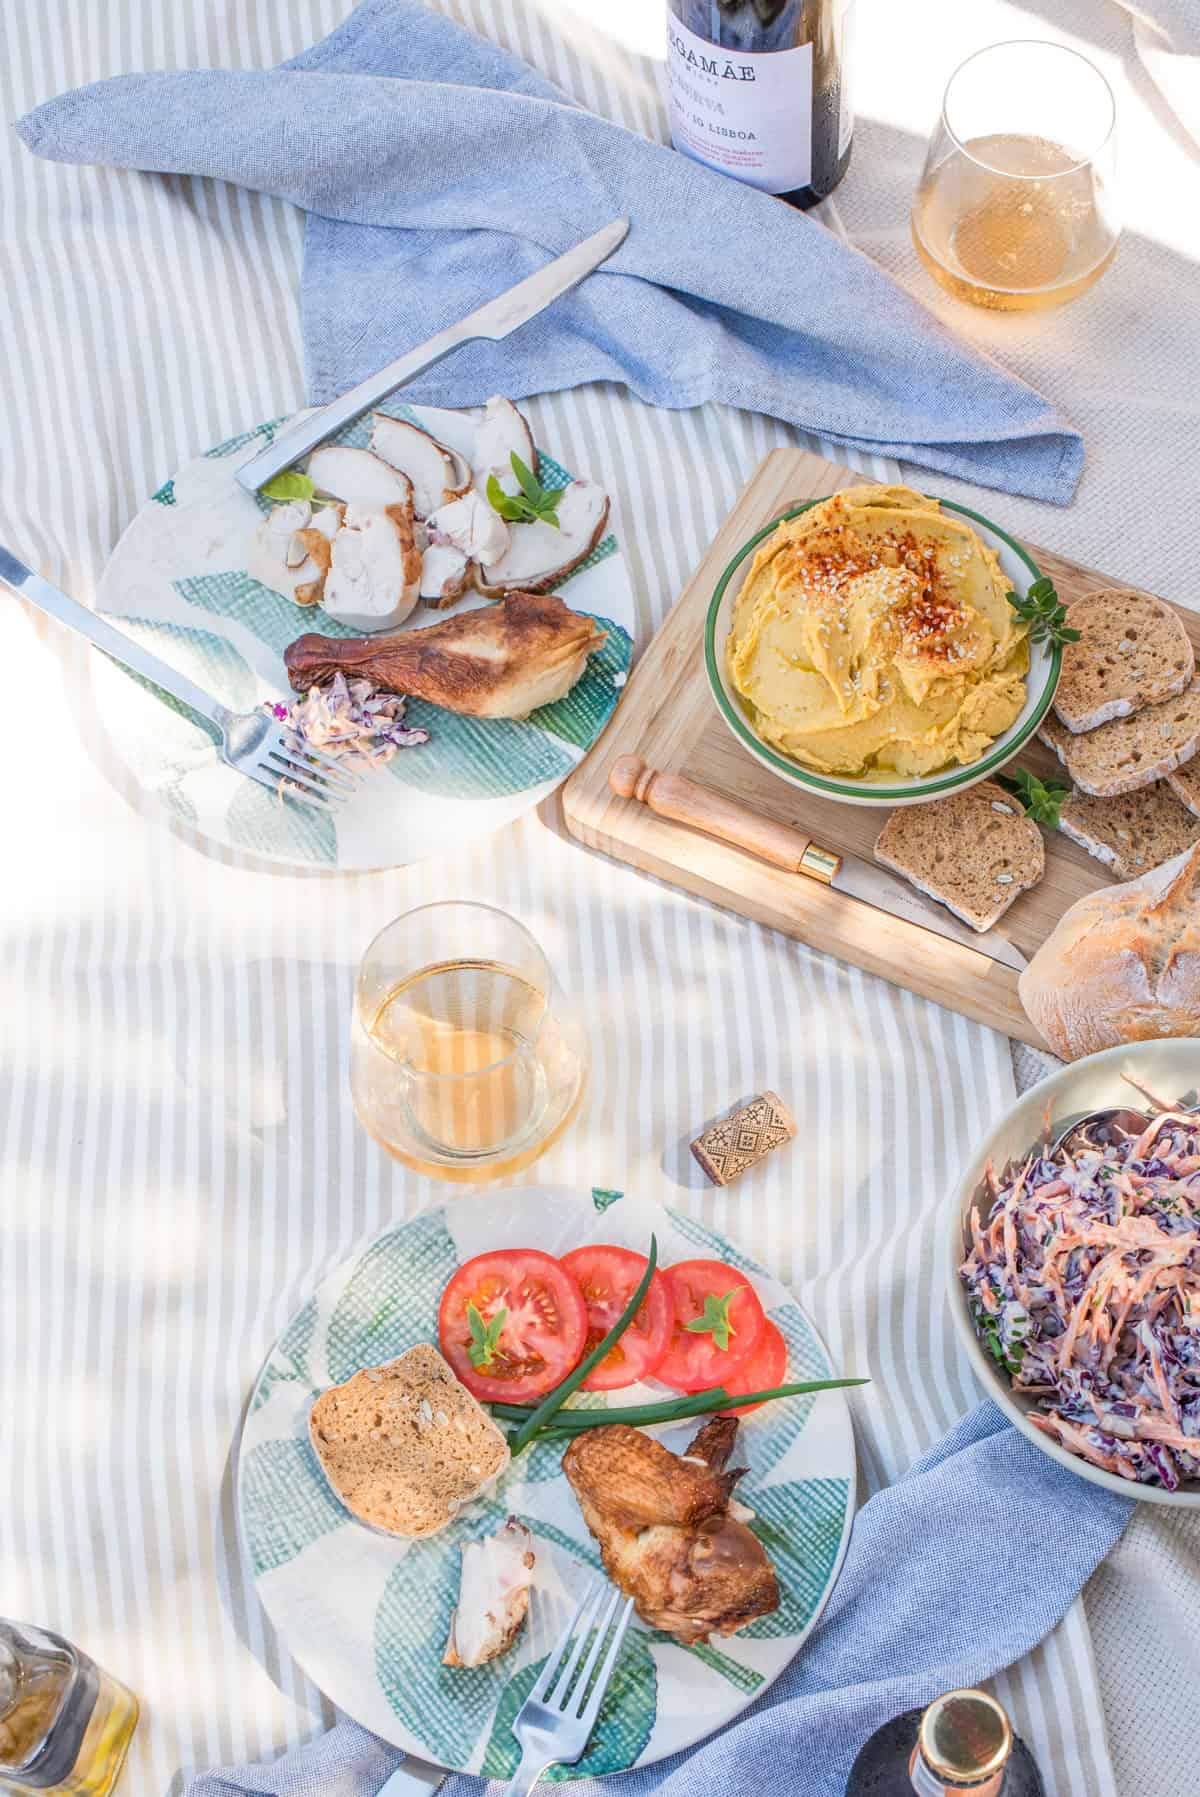 A picnic setup featuring two plates with chicken, mixed salads, and bread, a bowl of hummus with pita bread, two glasses of beverage, and utensils on a striped cloth.